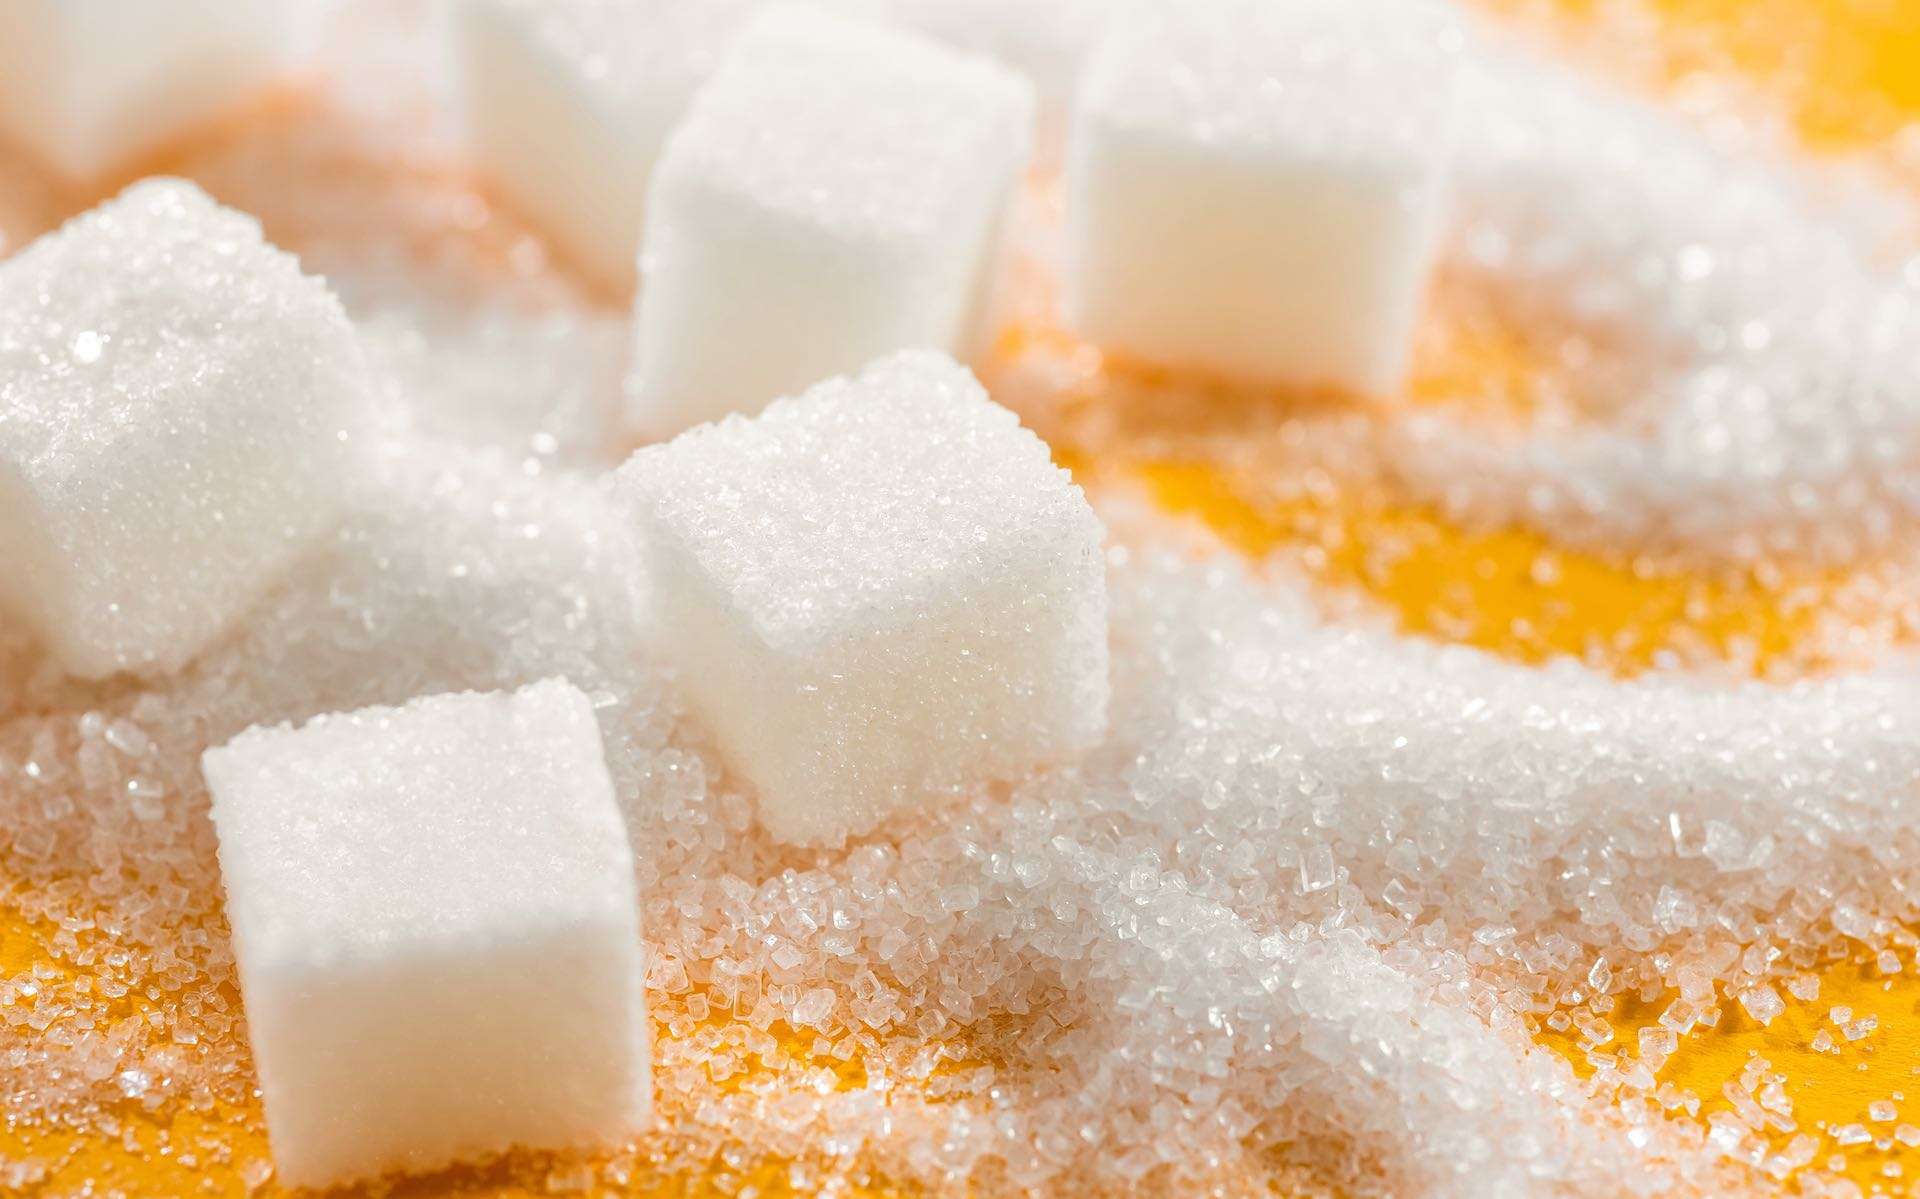 India is a world leader in sugar production and export